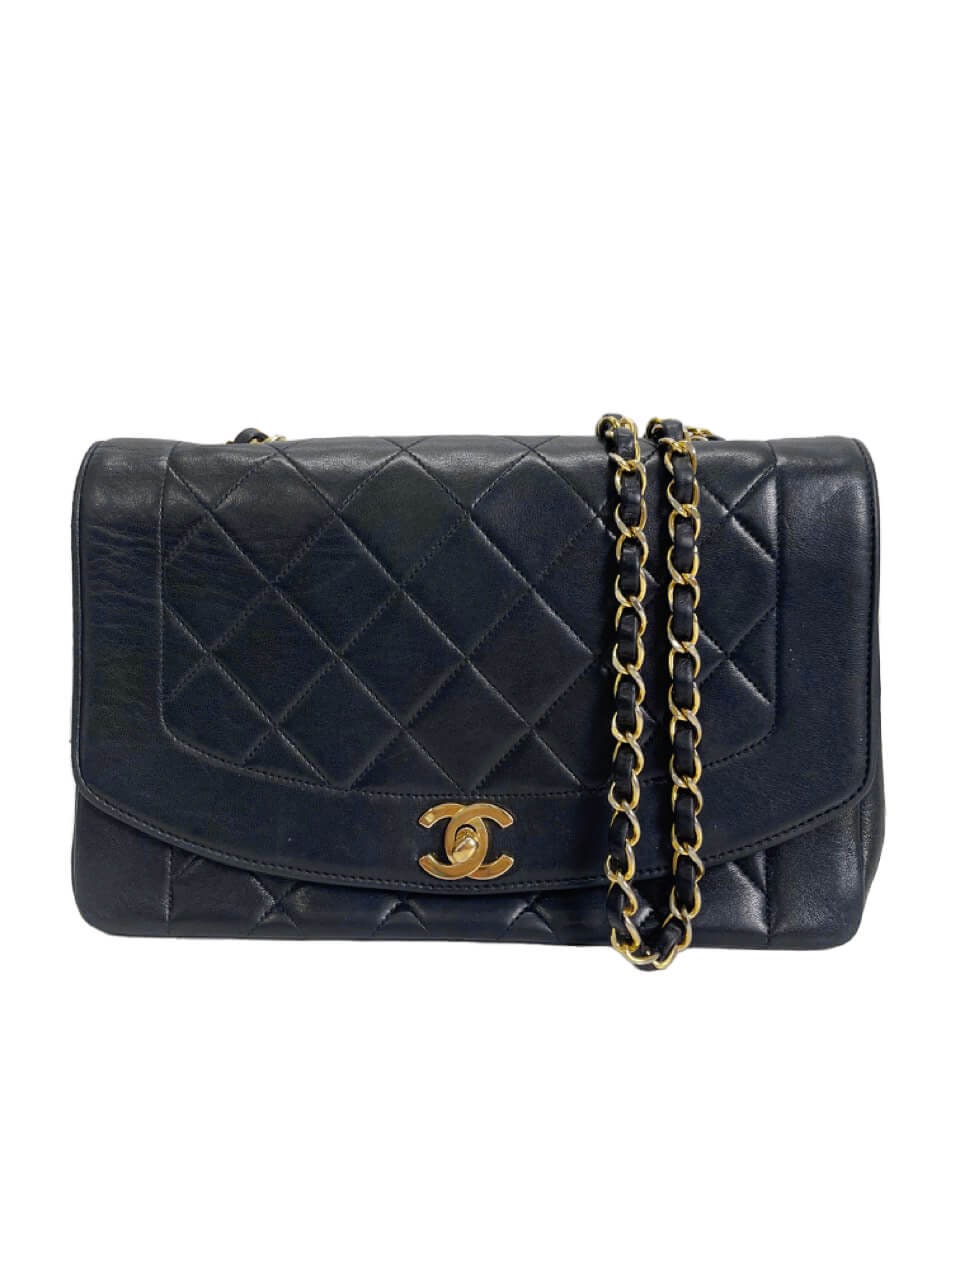 Lot 701: Chanel Diana Quilted Patent Single Flap Bag, Small